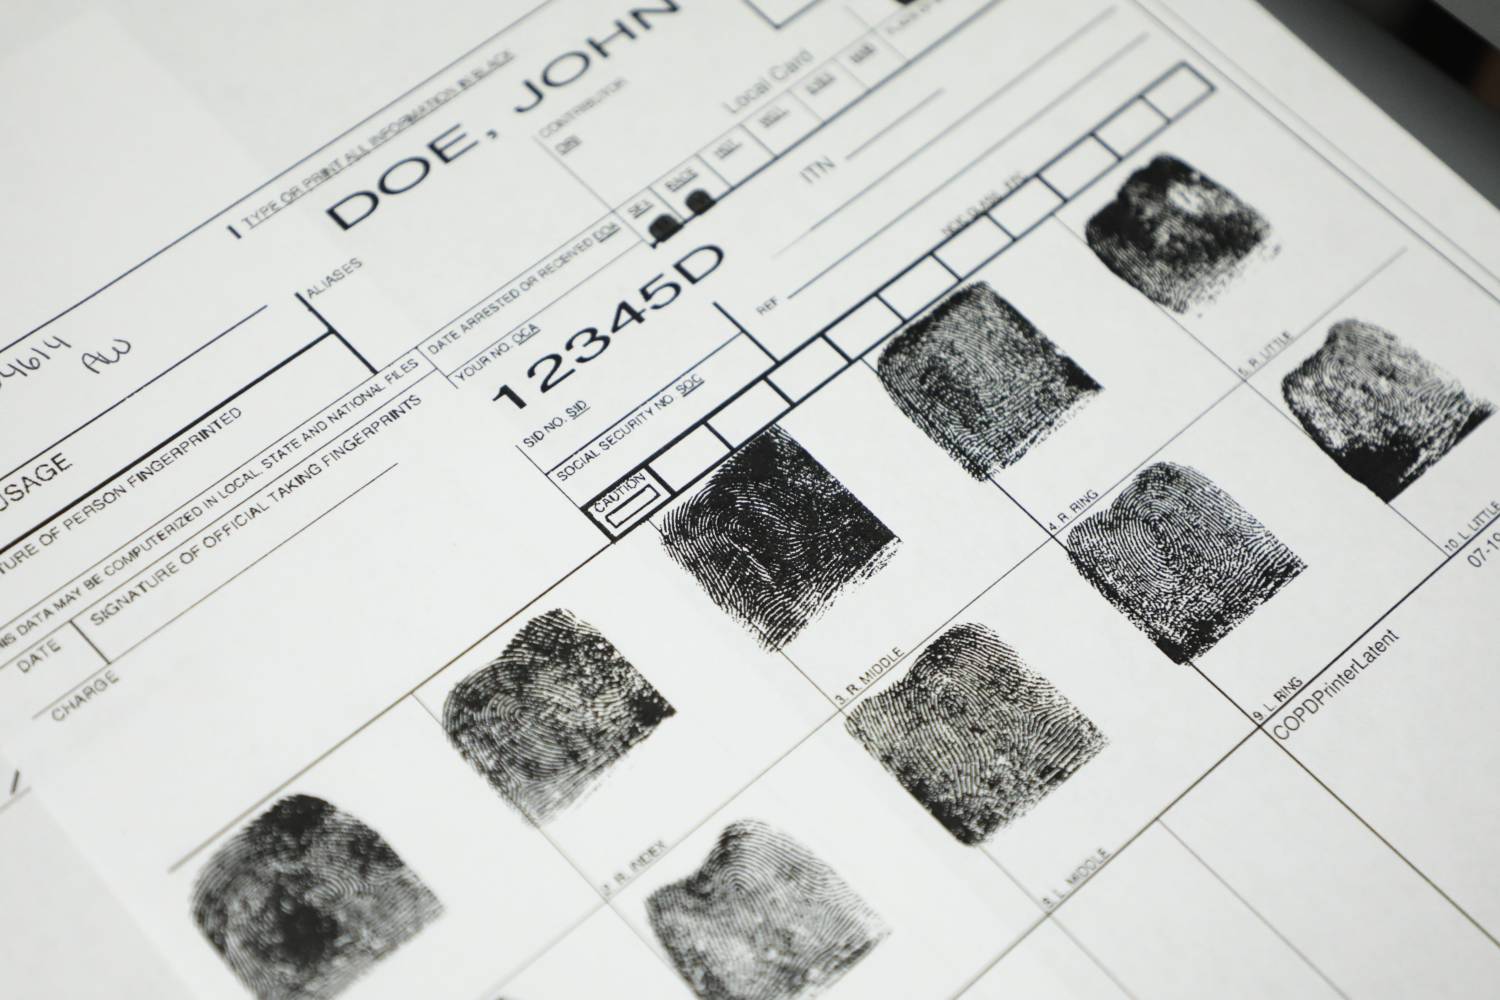 Fingerprints for a John Doe on Tuesday, September 17, 2019 at the Columbus Division of Police Forensic Services Center in Columbus, Ohio. In a Nov. 18, 2020, letter to law enforcement and courts, Attorney General Dave Yost's office reinforced their legal obligation to provide fingerprints and arrest records to keep updated state records used to run background checks for those purchasing guns or obtaining a concealed carry permit. [Joshua A. Bickel/Dispatch]Mt Crime Lab Jb 16